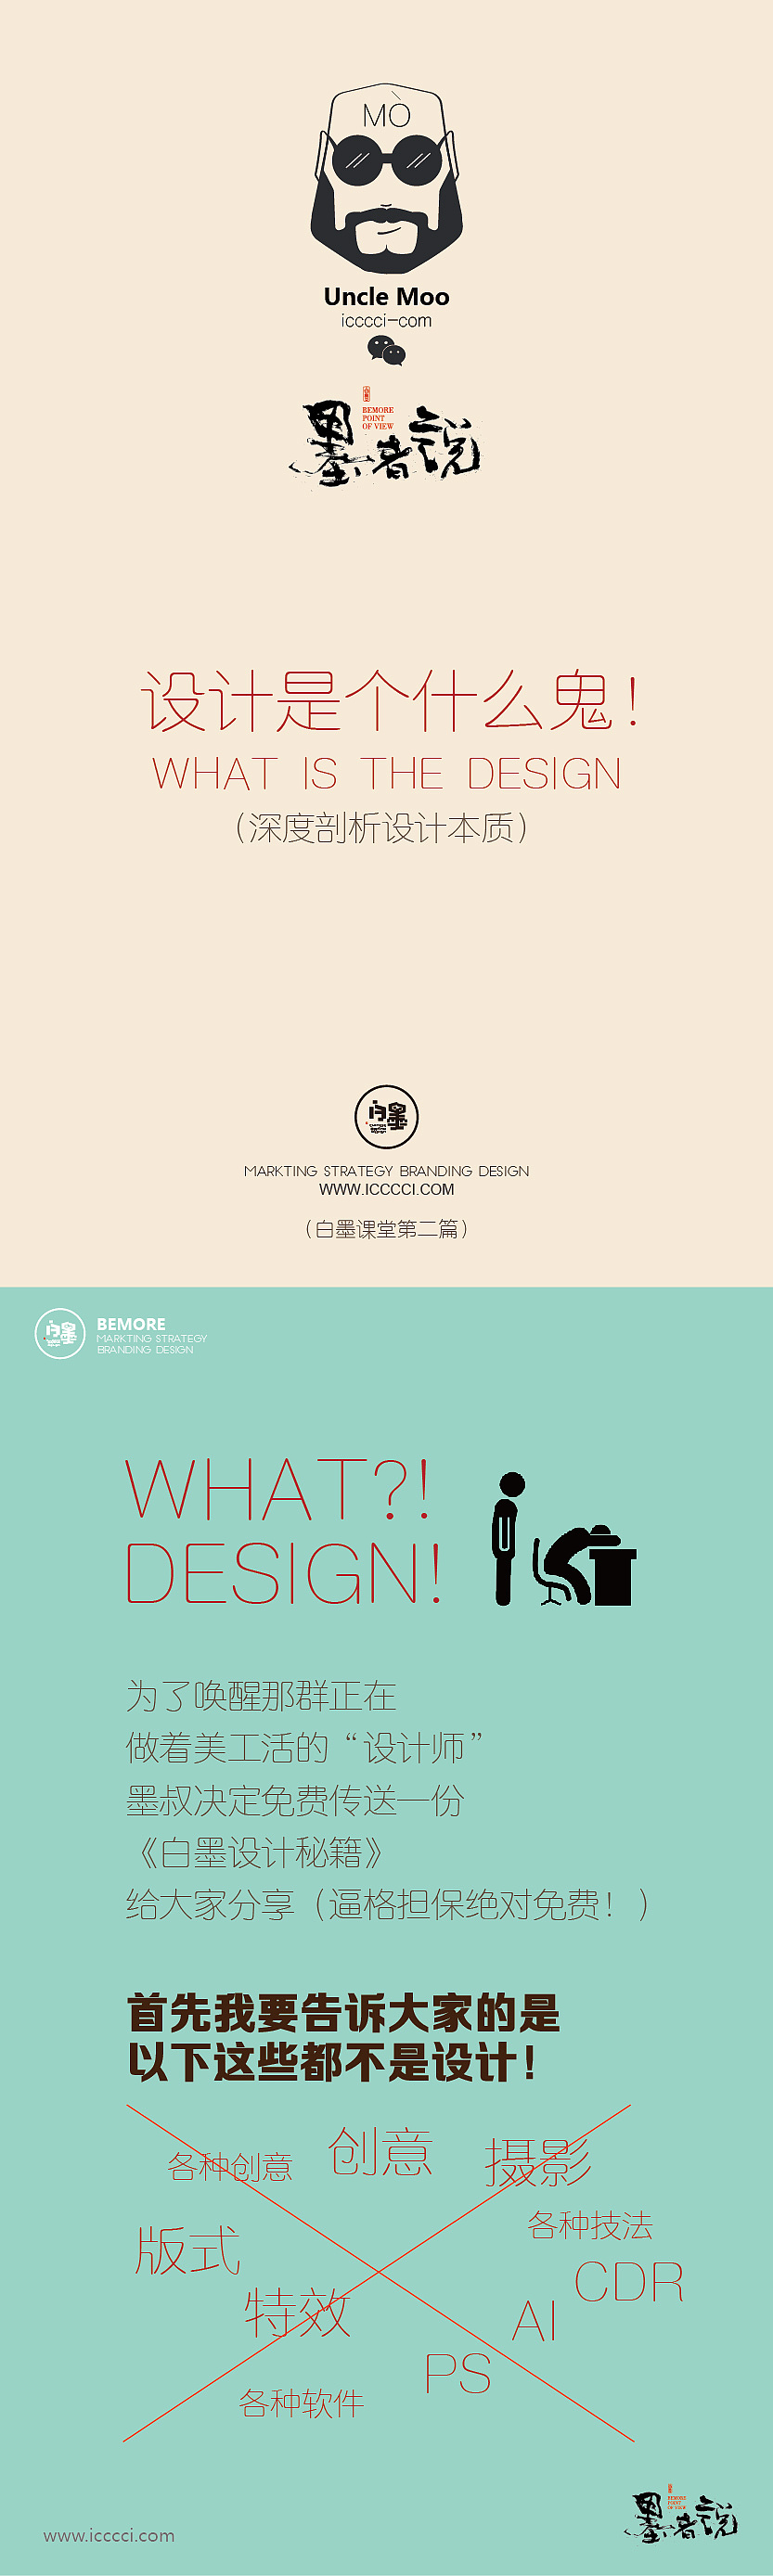 White Ink Advertising-Design Teaching-What the hell is design? Are you still using an artist as a designer?